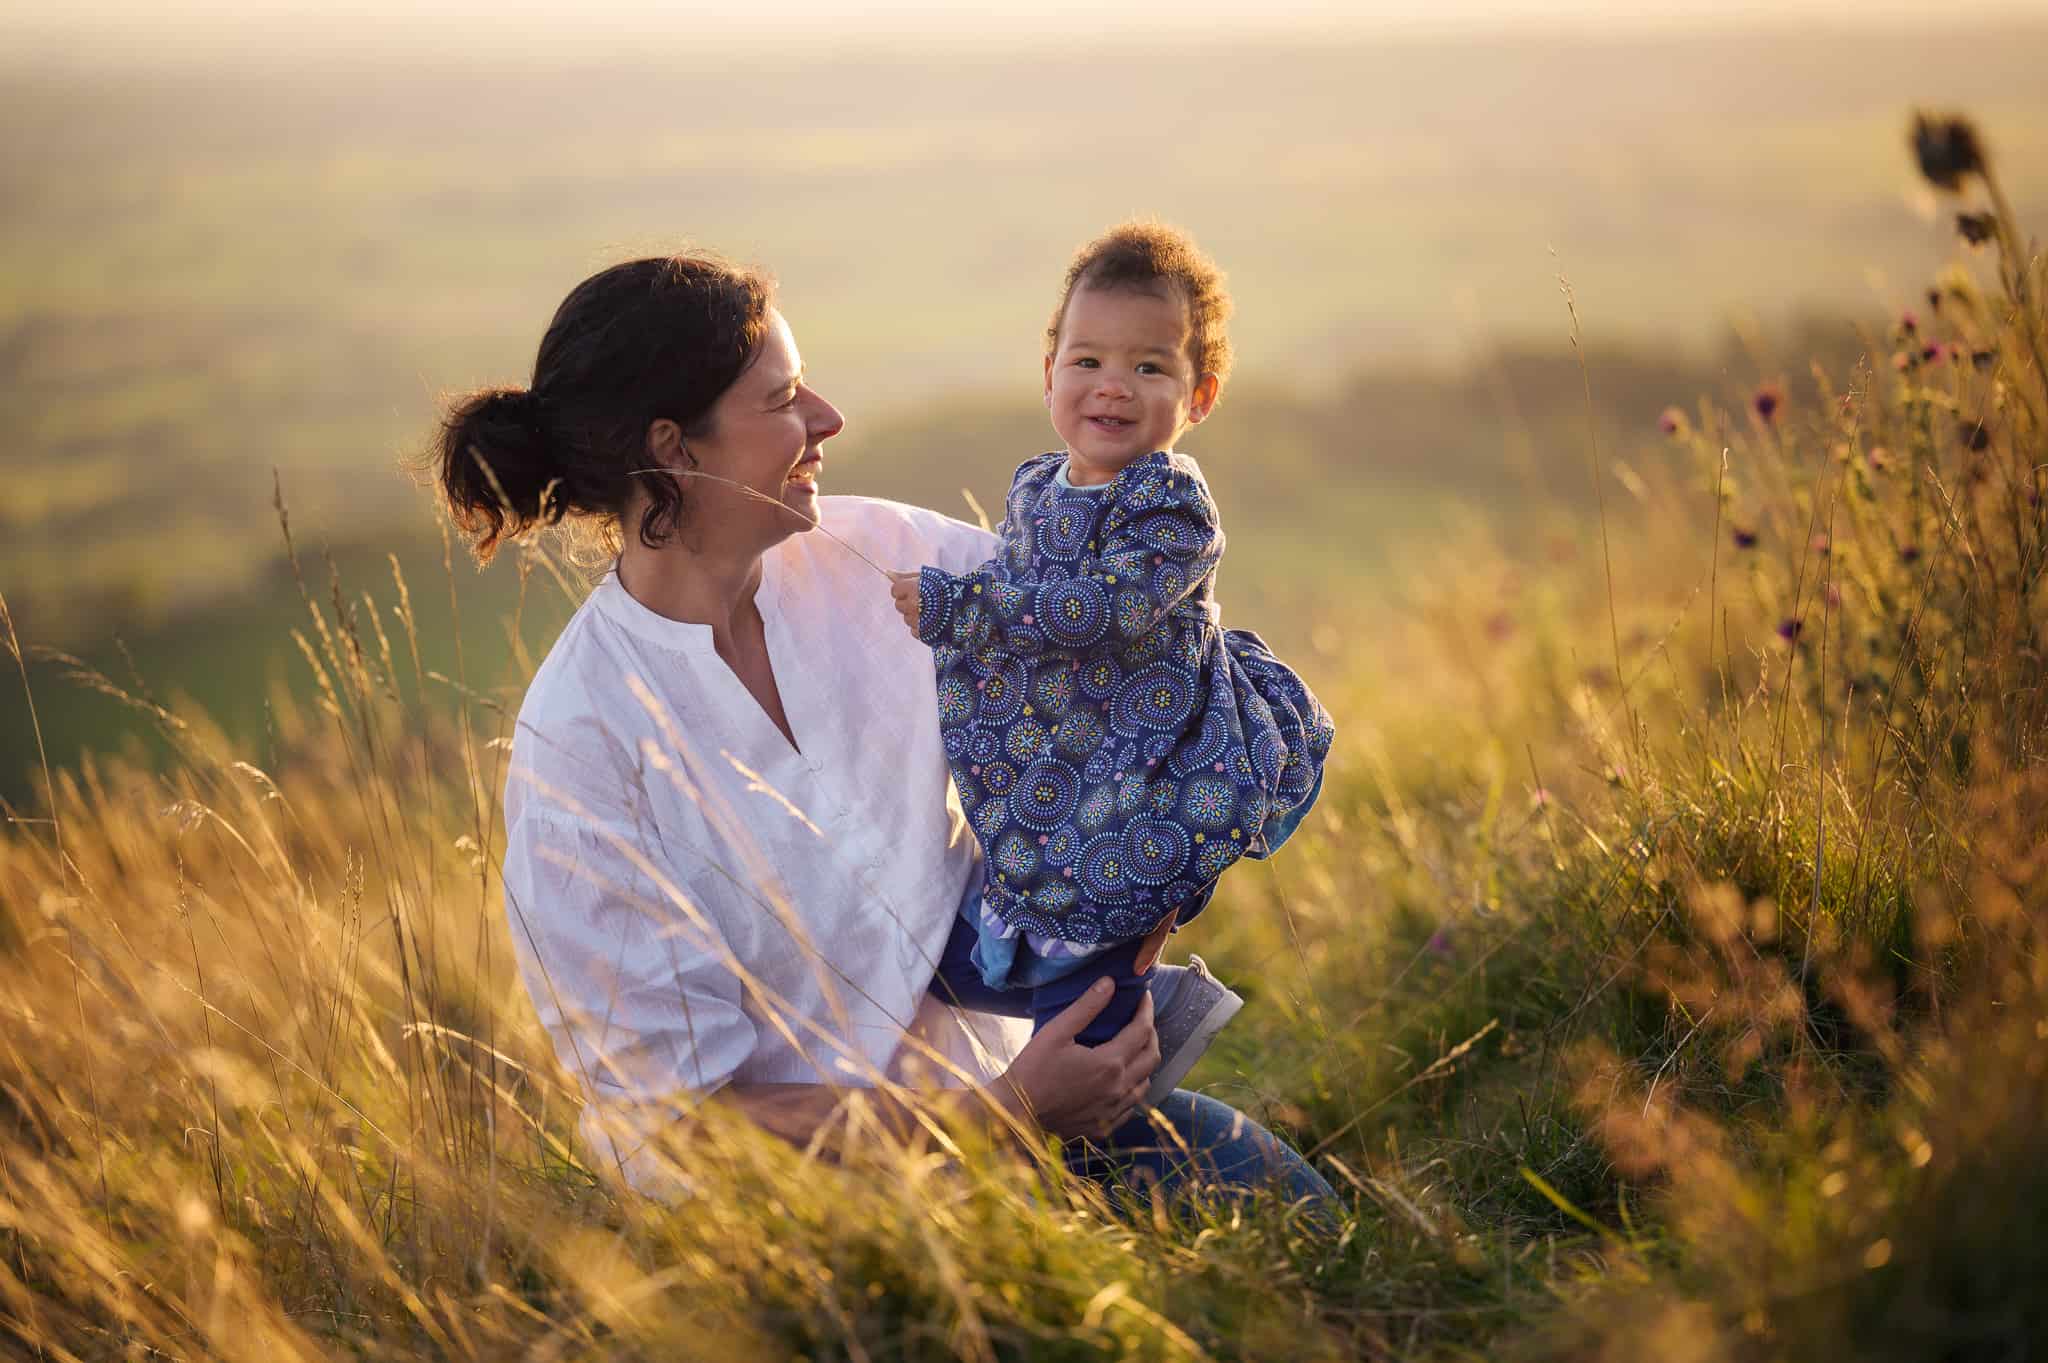 Mother and daughter photograph sitting in a field at sunset